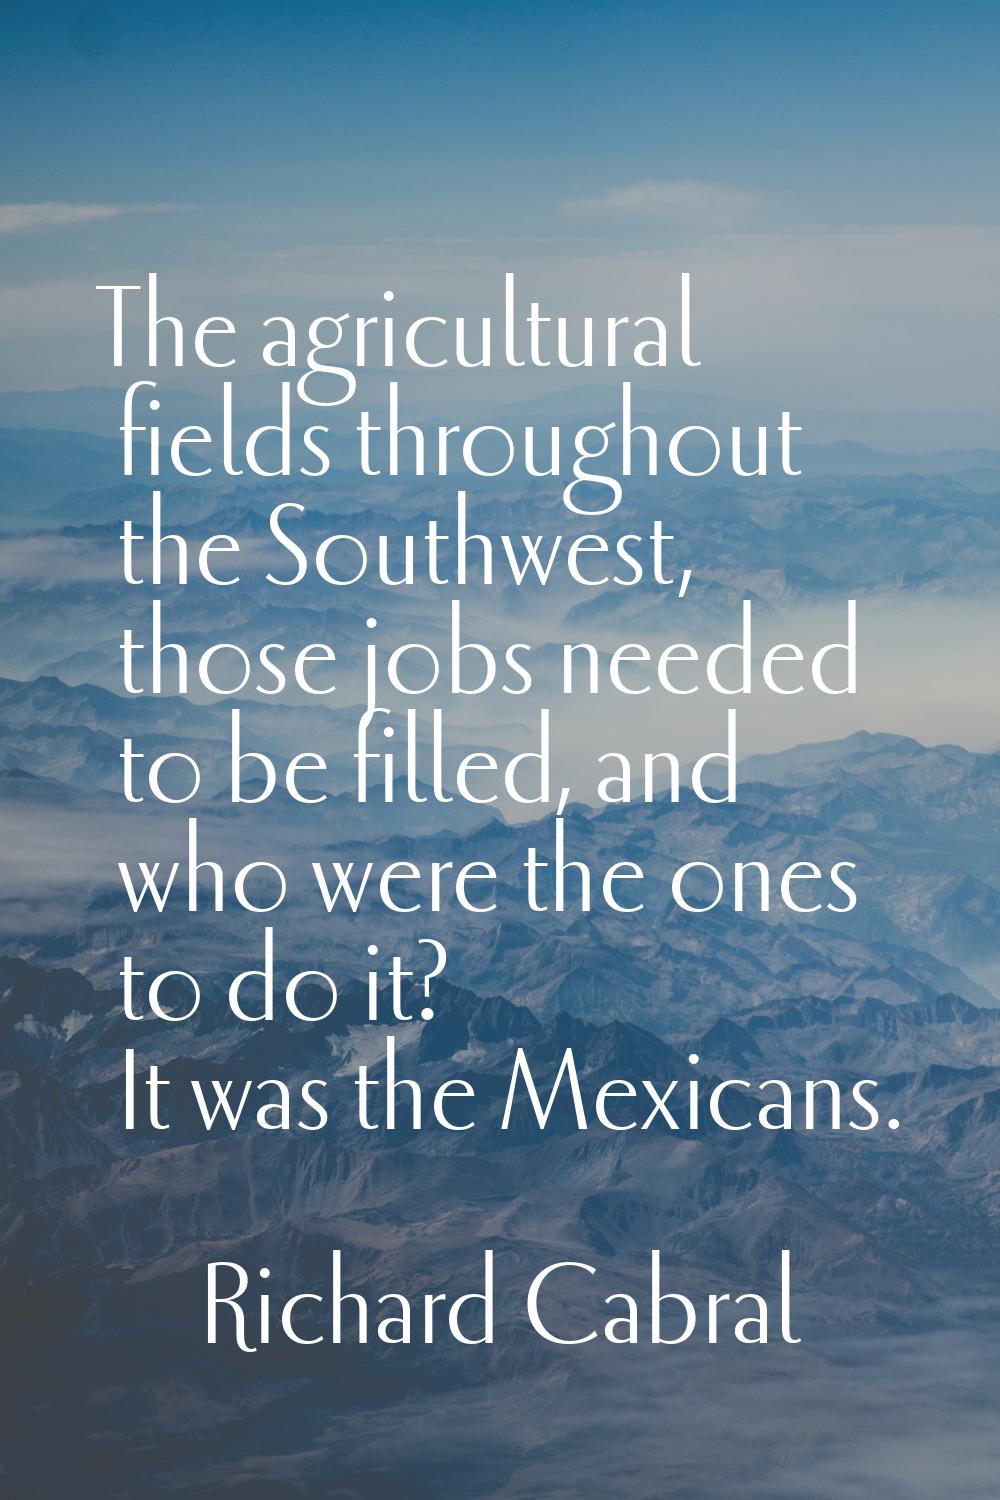 The agricultural fields throughout the Southwest, those jobs needed to be filled, and who were the 